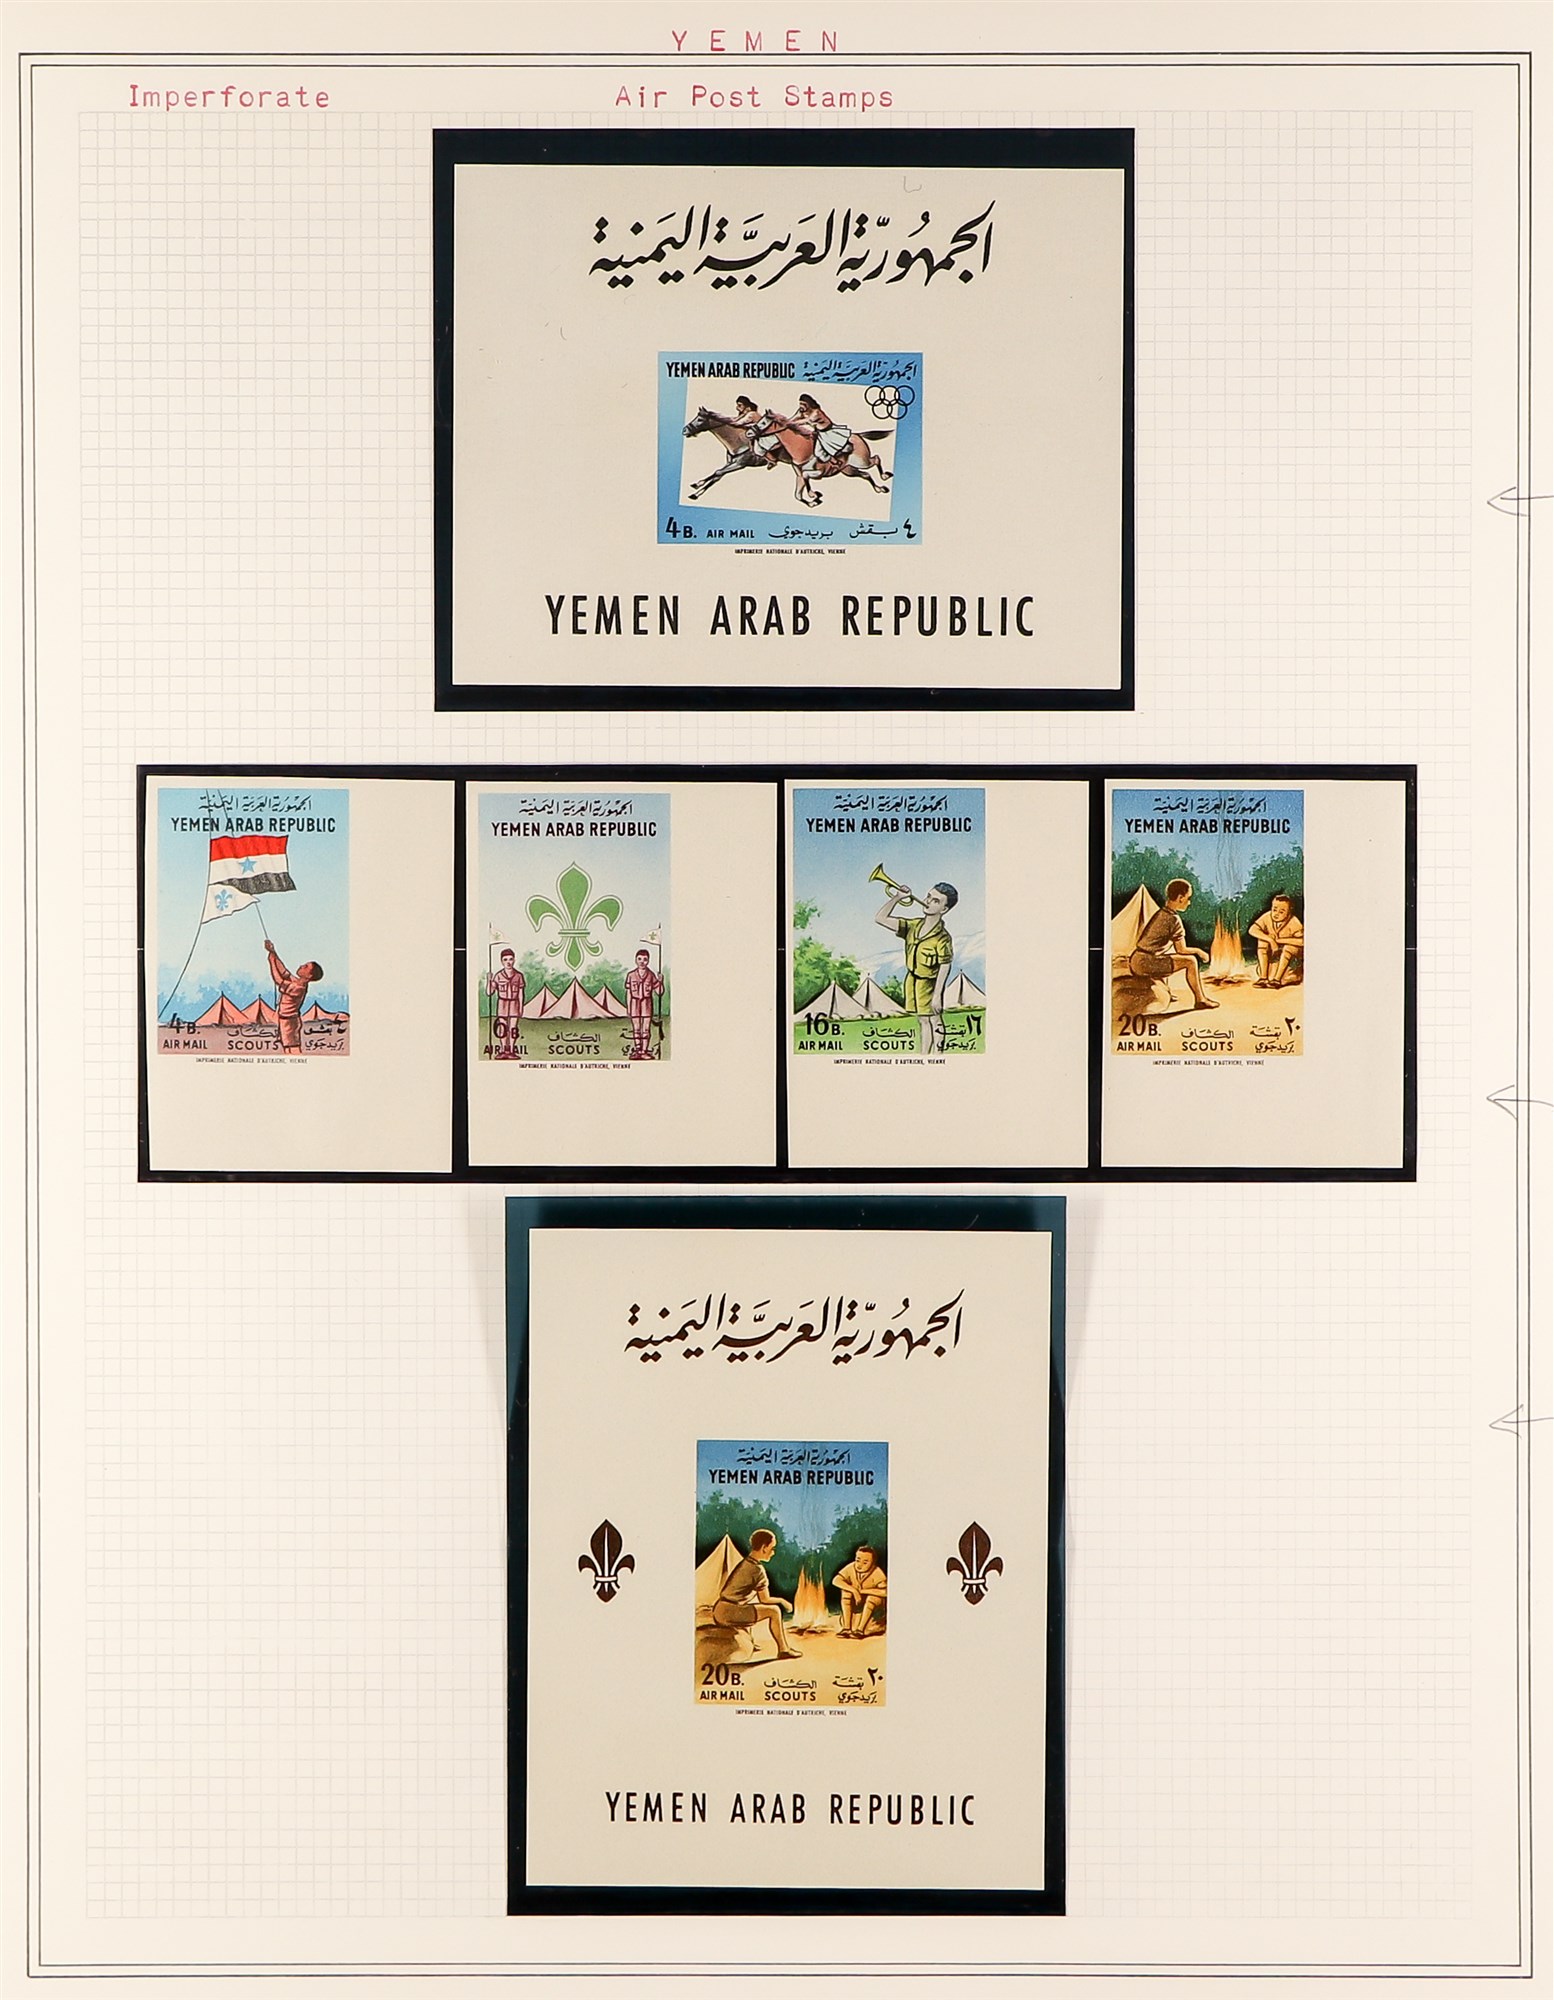 YEMEN 1961 - 1967 IMPERFORATES collection of imperforate sets in never hinged mint condition, - Image 6 of 6